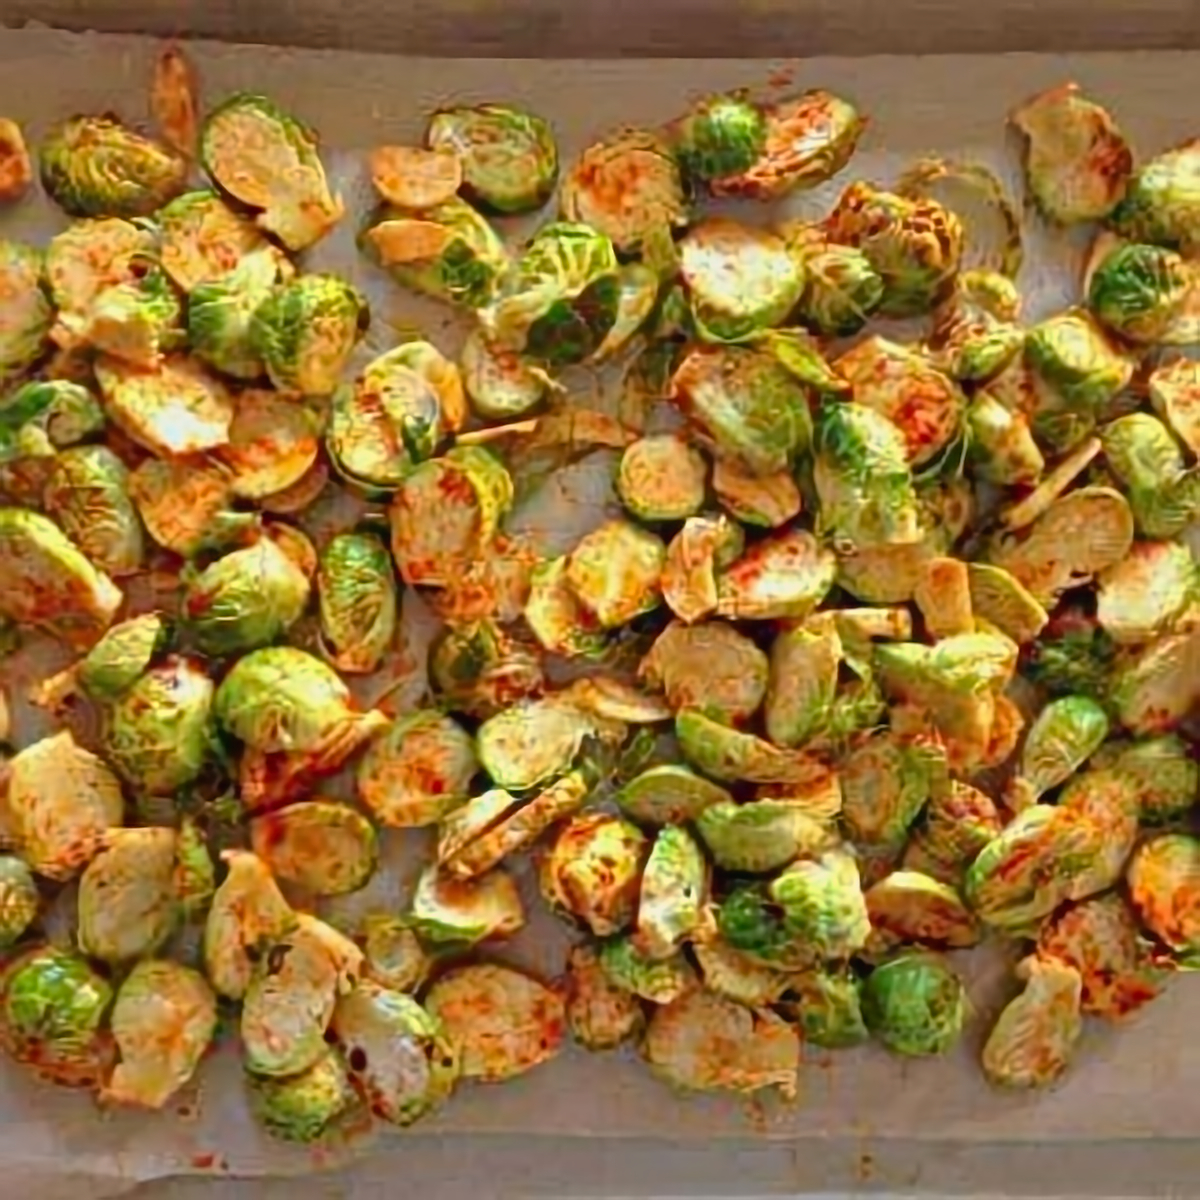 14. Roasted Brussels Sprouts Caesar Salad - easy brussel sprouts recipes